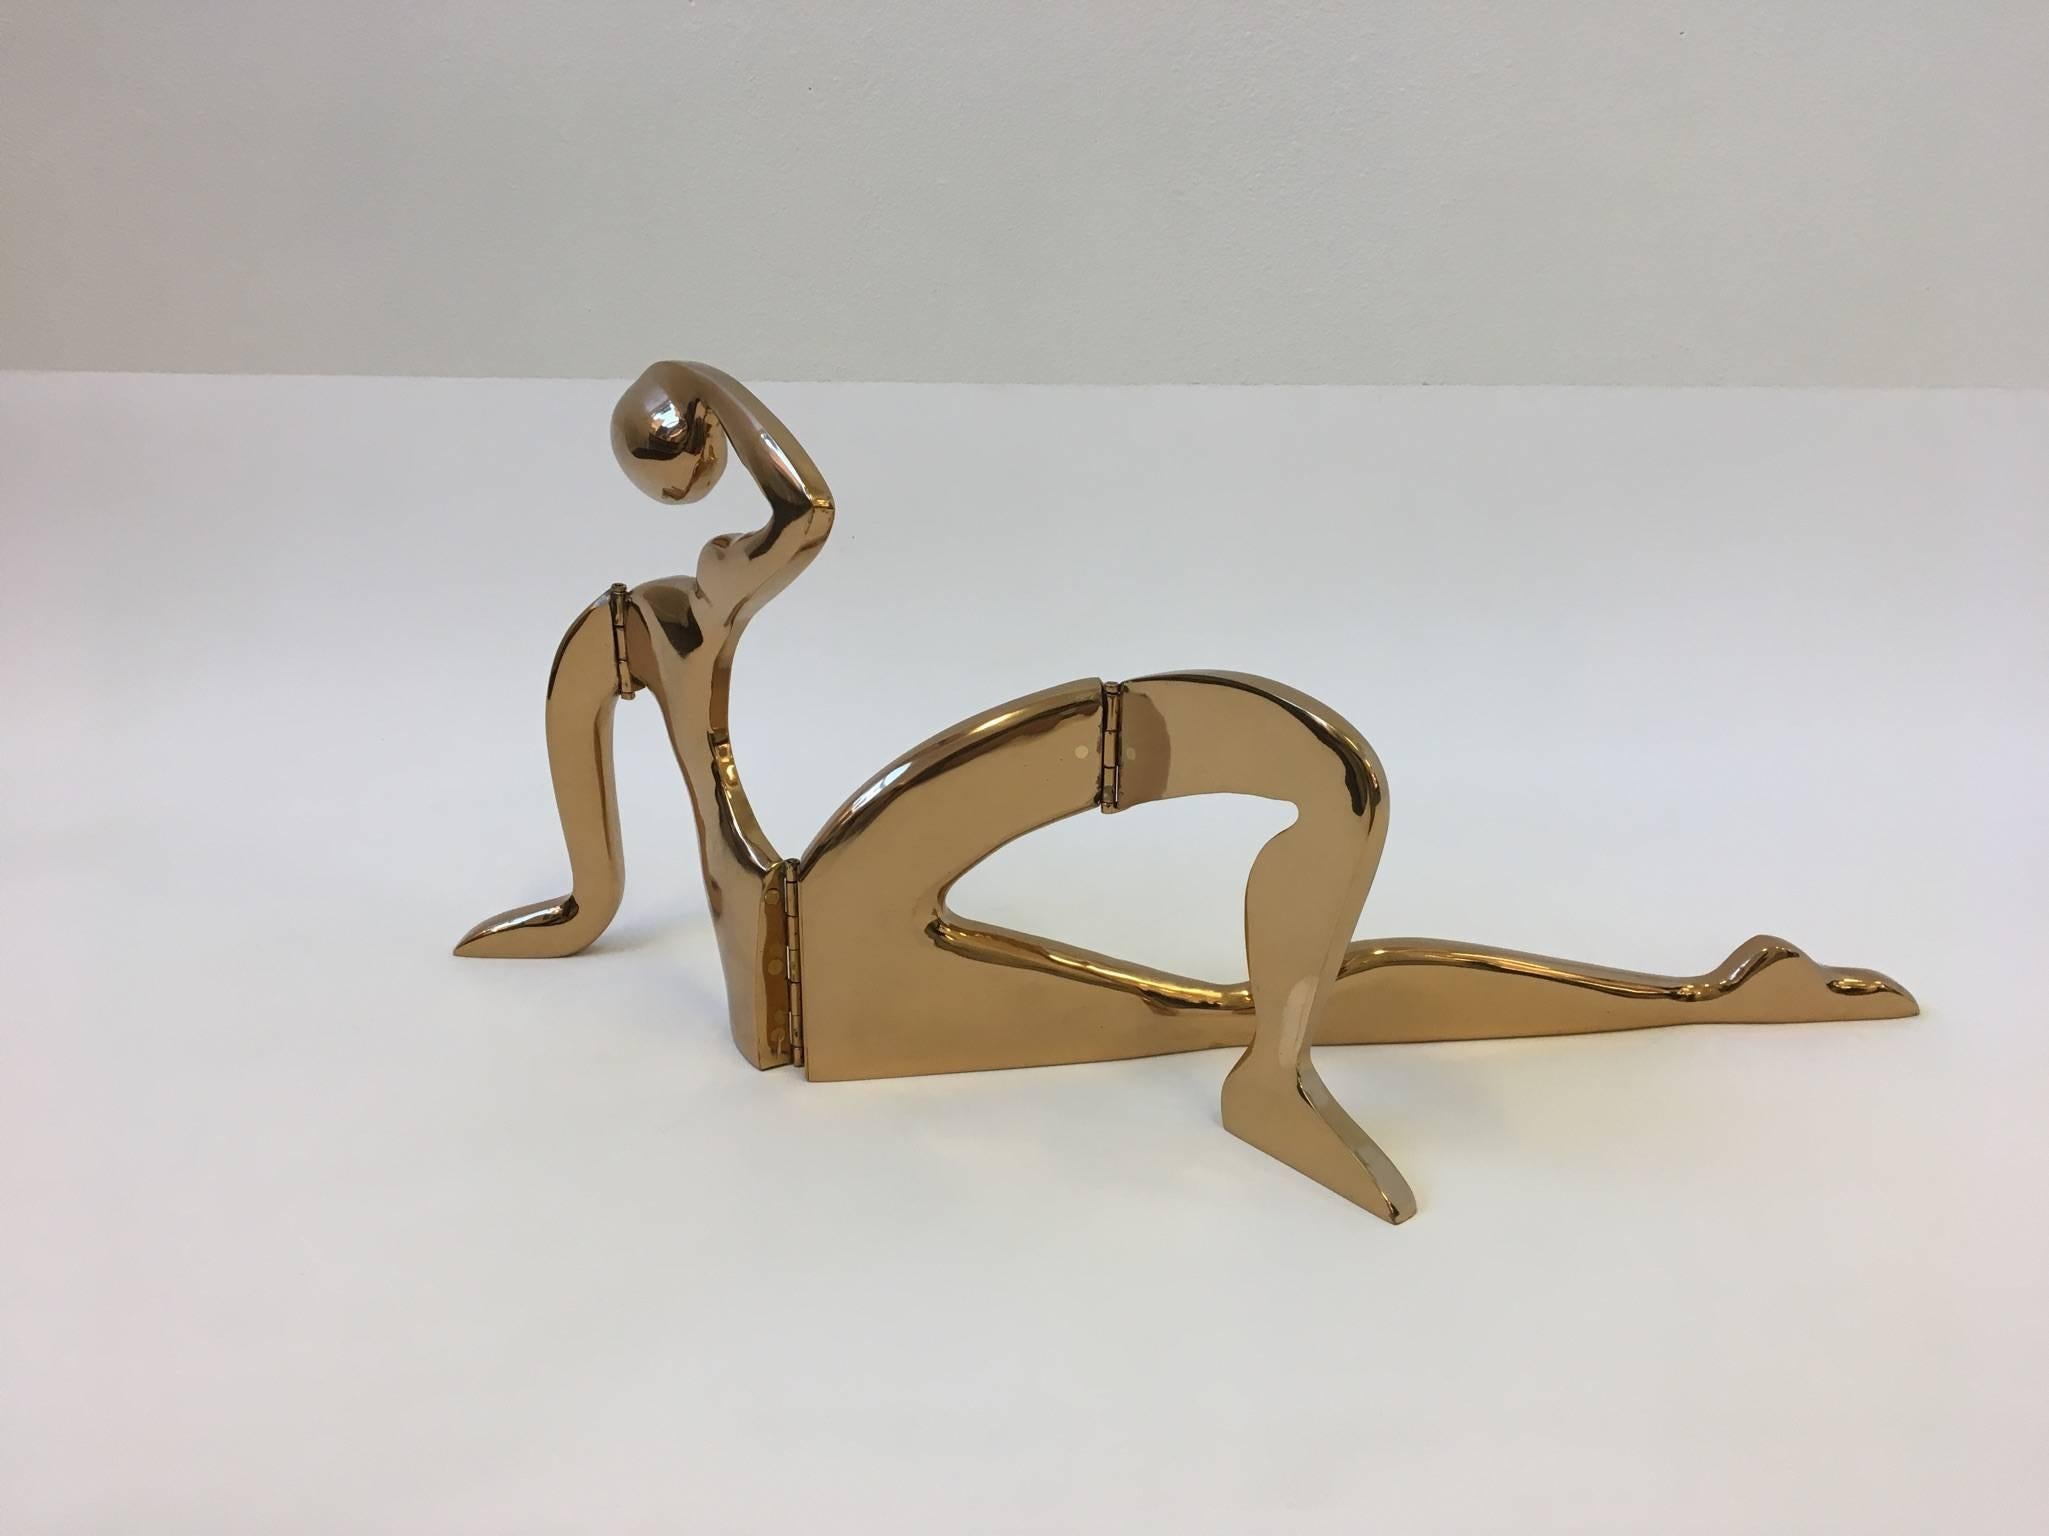 Polished Bronze Reclining Figure Sculpture by Eichengreen and Gensburg